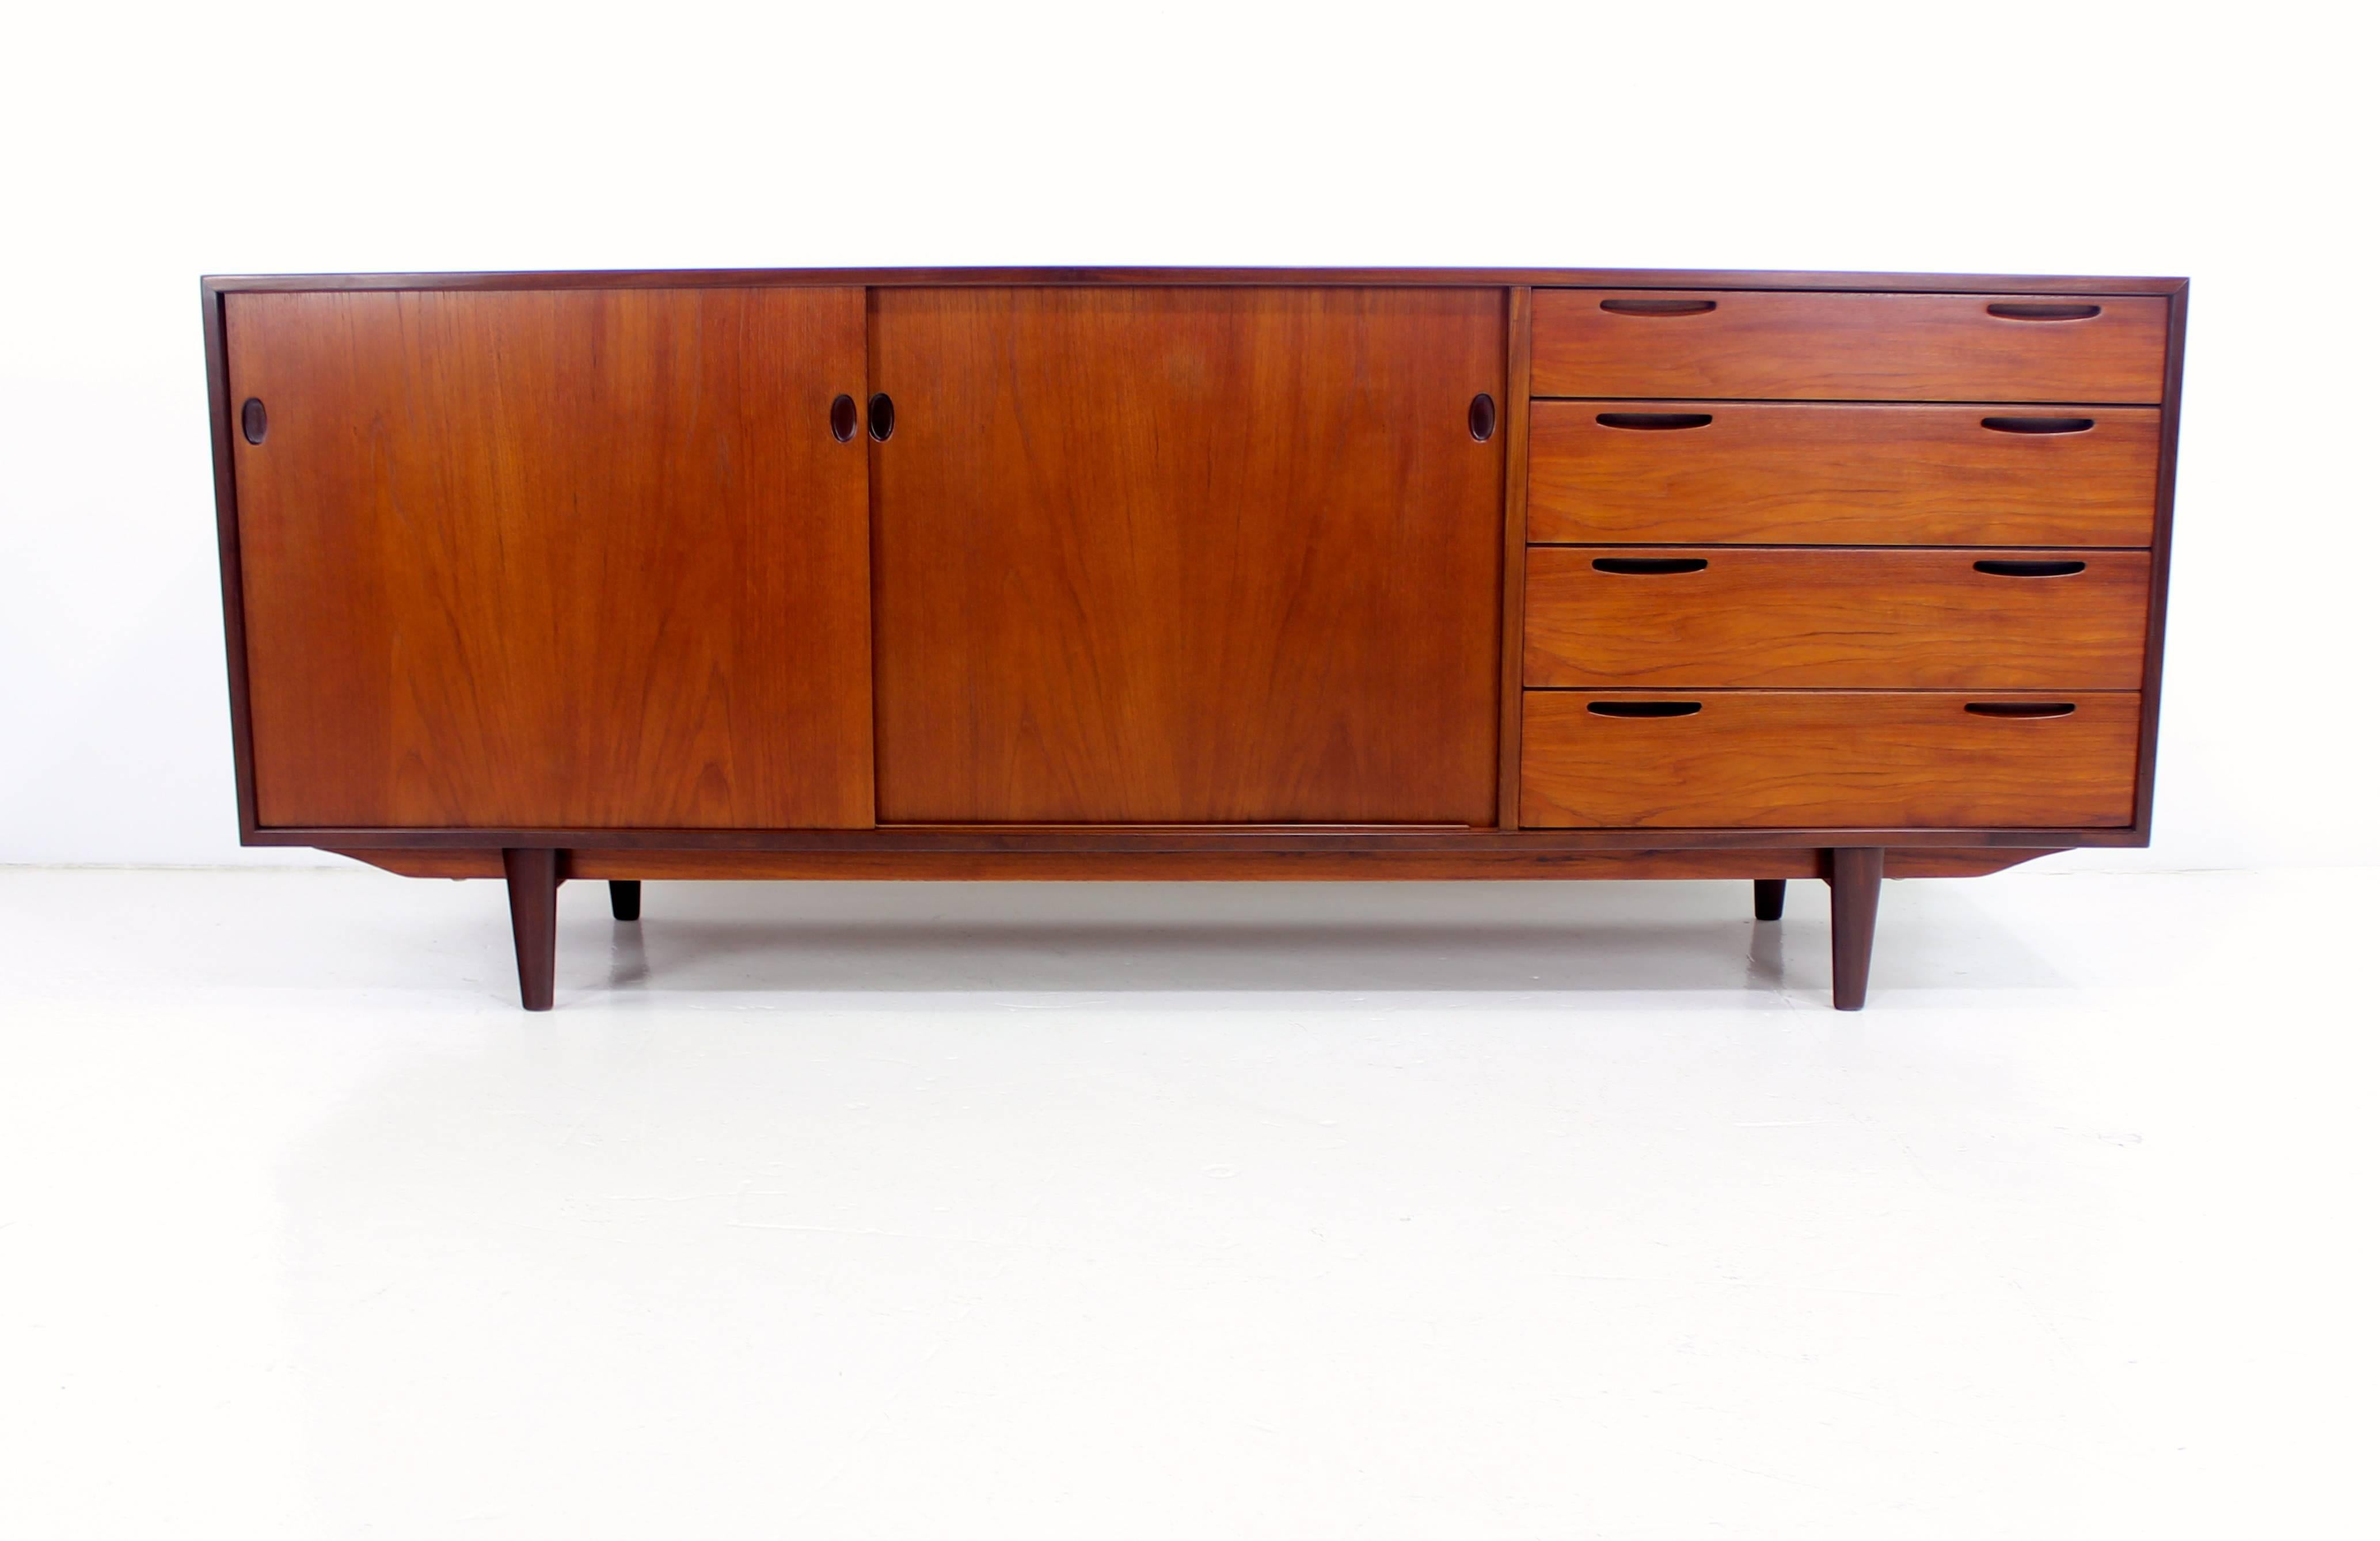 Danish modern credenza designed by Ib Kofod-Larsen.
Richly grained teak with beautifully crafted base.
Sliding doors open to two drawers in the middle, adjustable shelf on the left. 
Four generous drawers with exquisitely designed inset pulls on